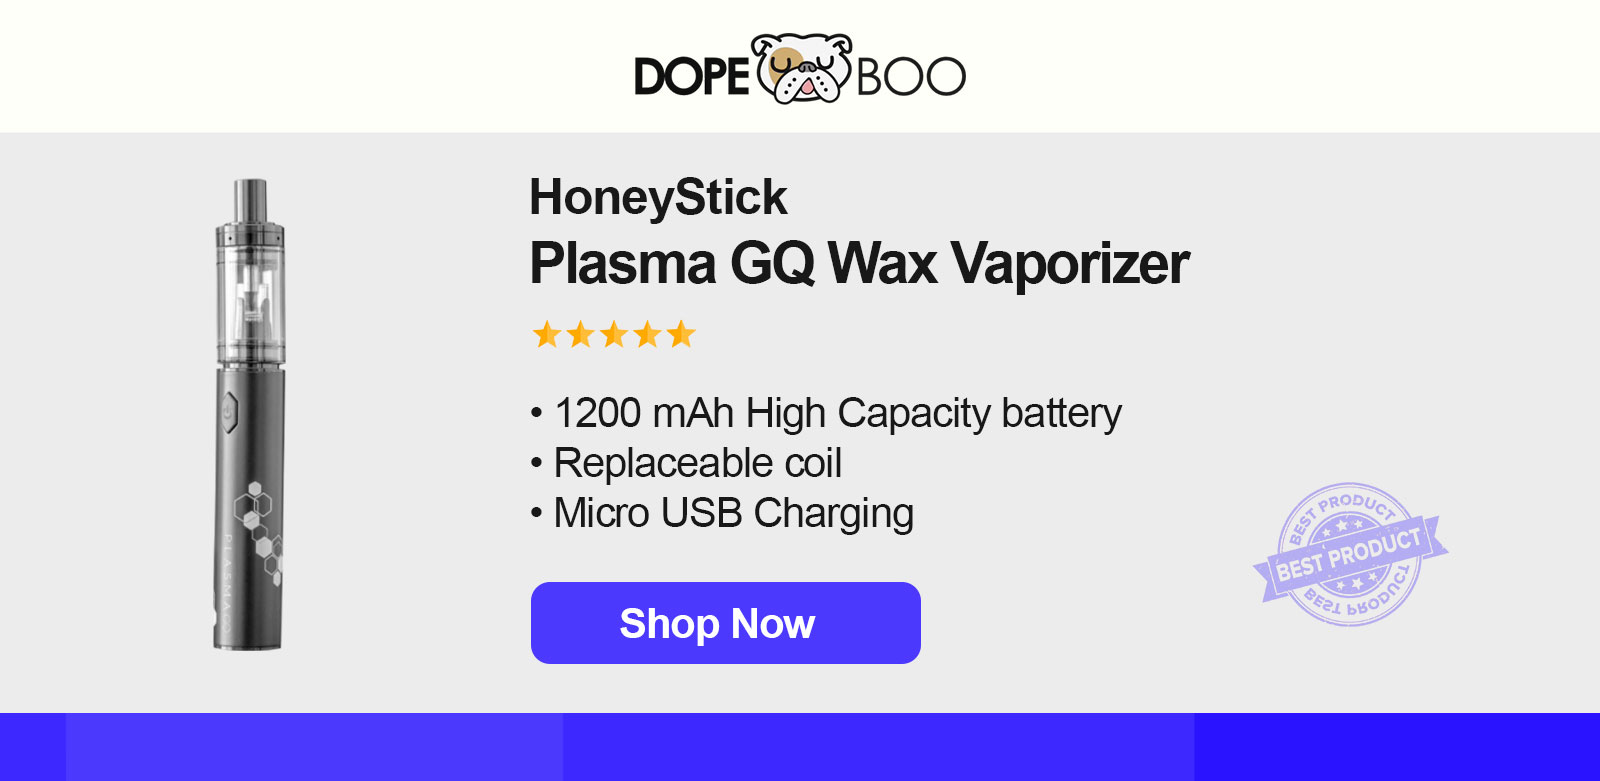 The Best Wax Vaporizers of 2023 – Daily High Club